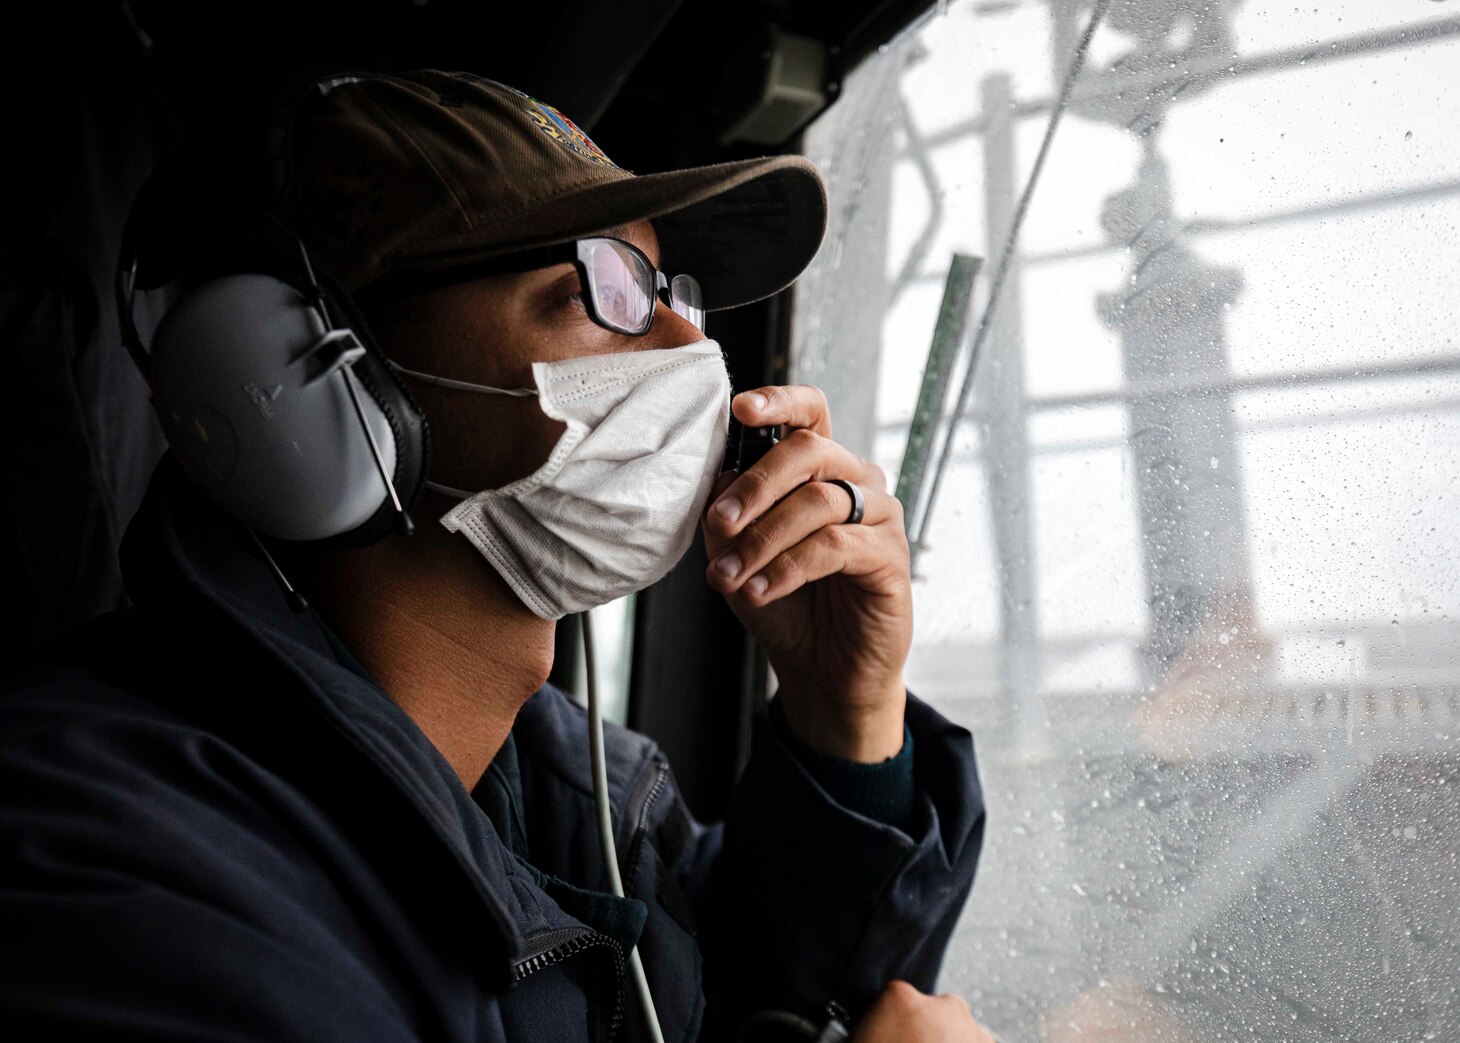 TAIWAN STRAIT (Dec. 30, 2020) Boatswain’s Mate 3rd Class Kristopher Allen, from Disputanta, Virginia, stands watch as bridge lookout in the pilot house aboard guided-missile destroyer USS John S. McCain (DDG 56) while the ship conducts routine underway operations in support of stability and security for a free and open Indo-Pacific. Sea control is foundational for all other naval missions that support the Joint Force, including power projection.